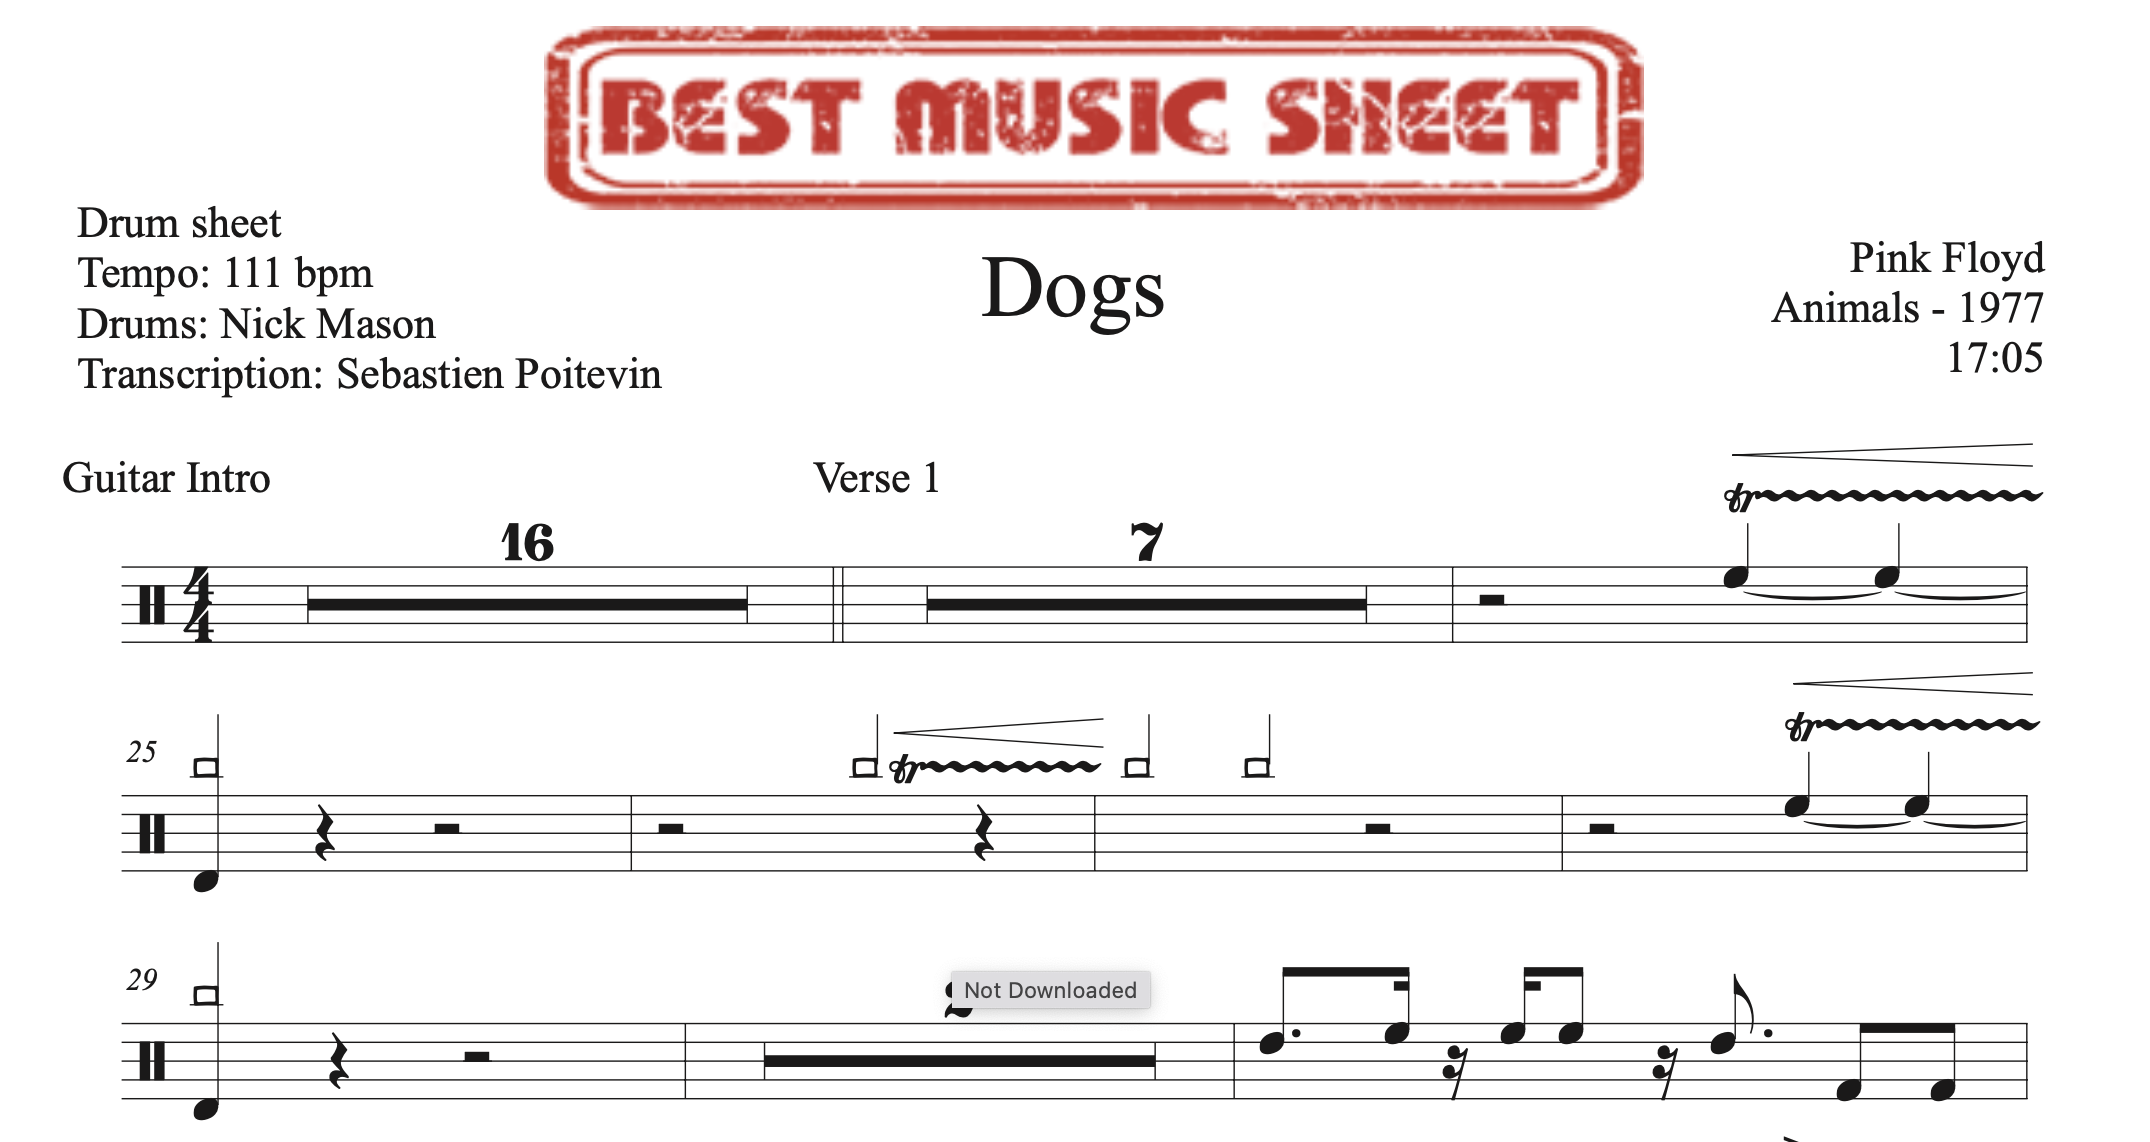 Sample drum sheet of Dogs by Pink Floyd